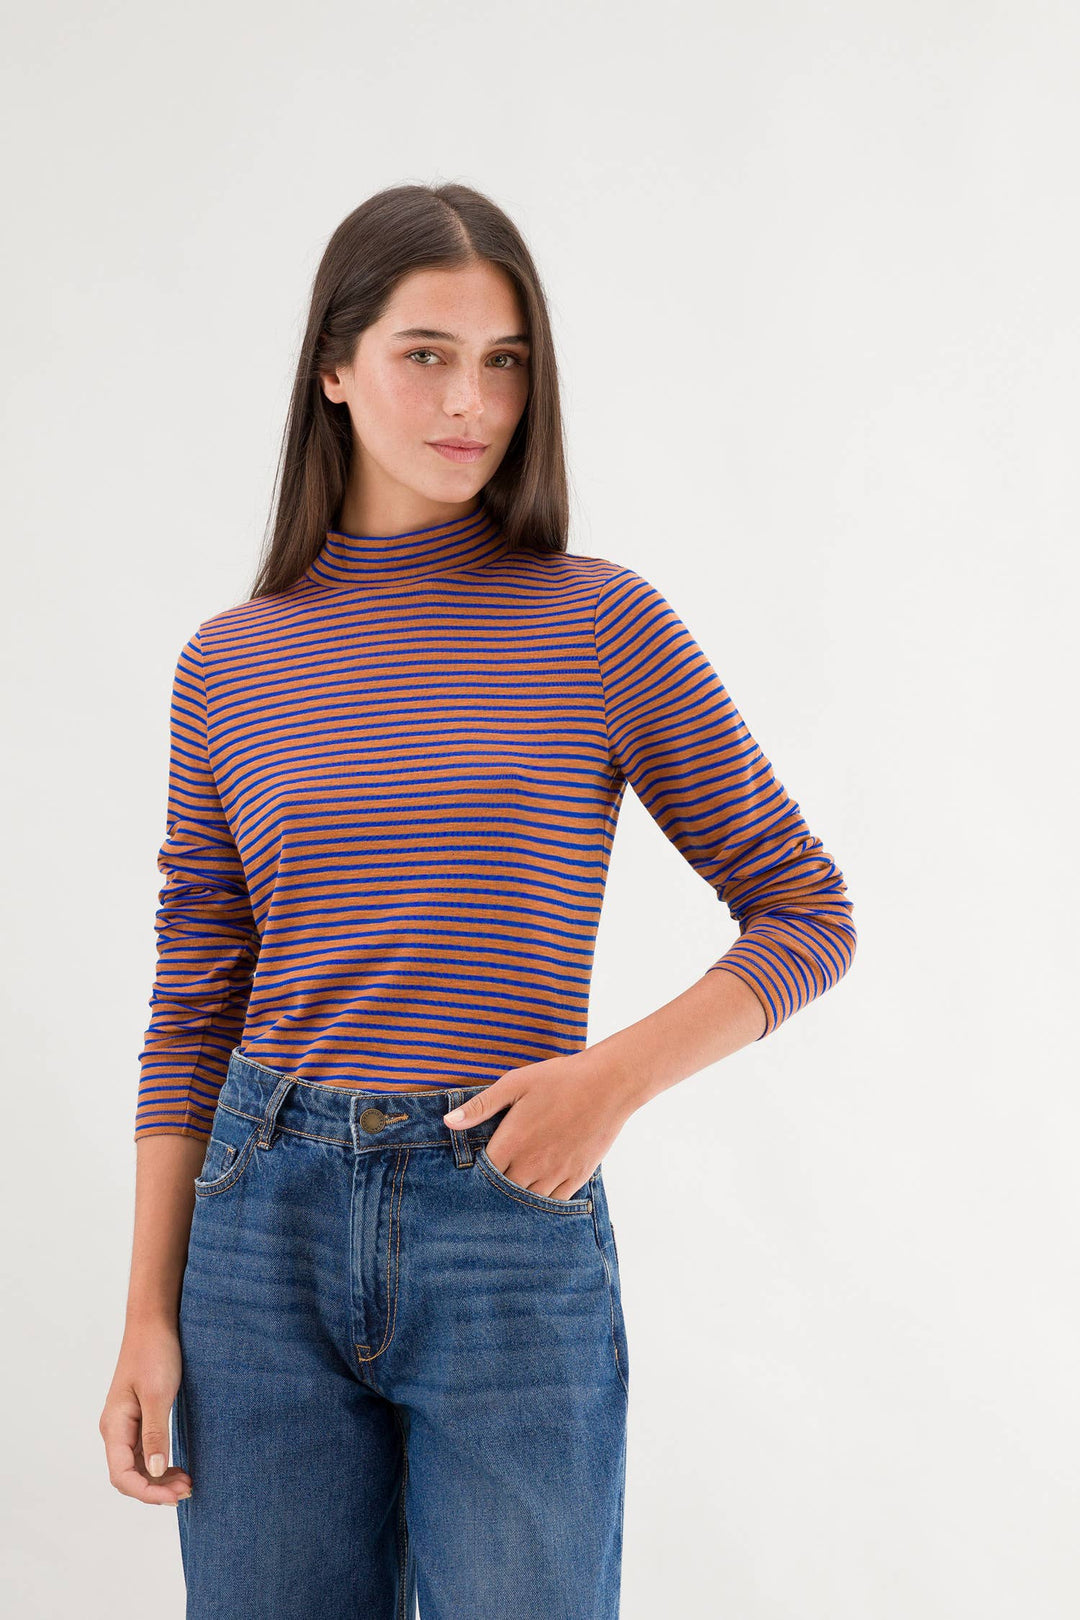 Striped T-Shirt with High Collar - Tangerine & Blue